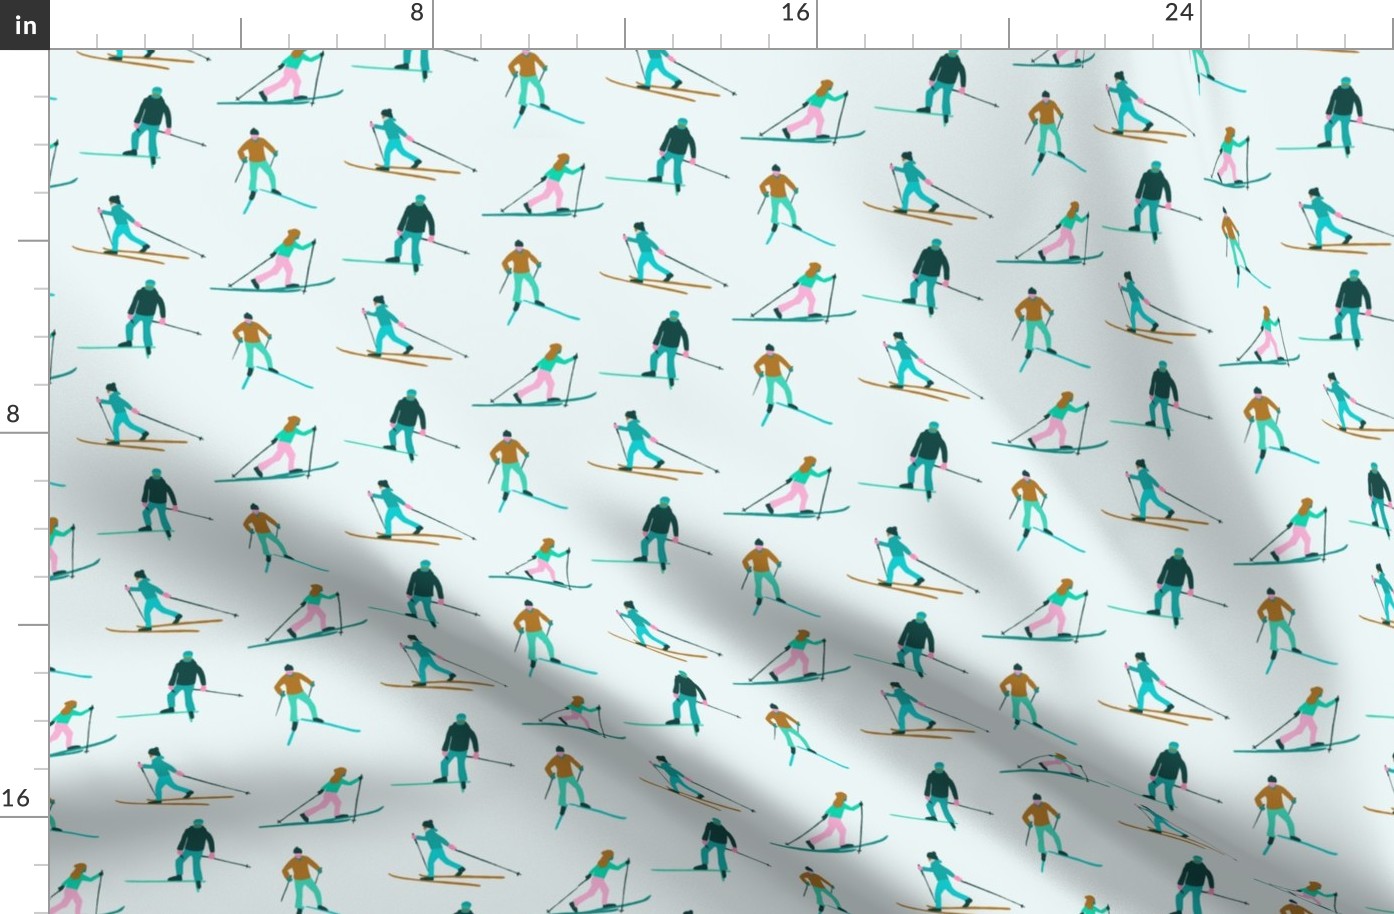 Nordic Skiers Cross-Country Skiing Winter Holiday Design 